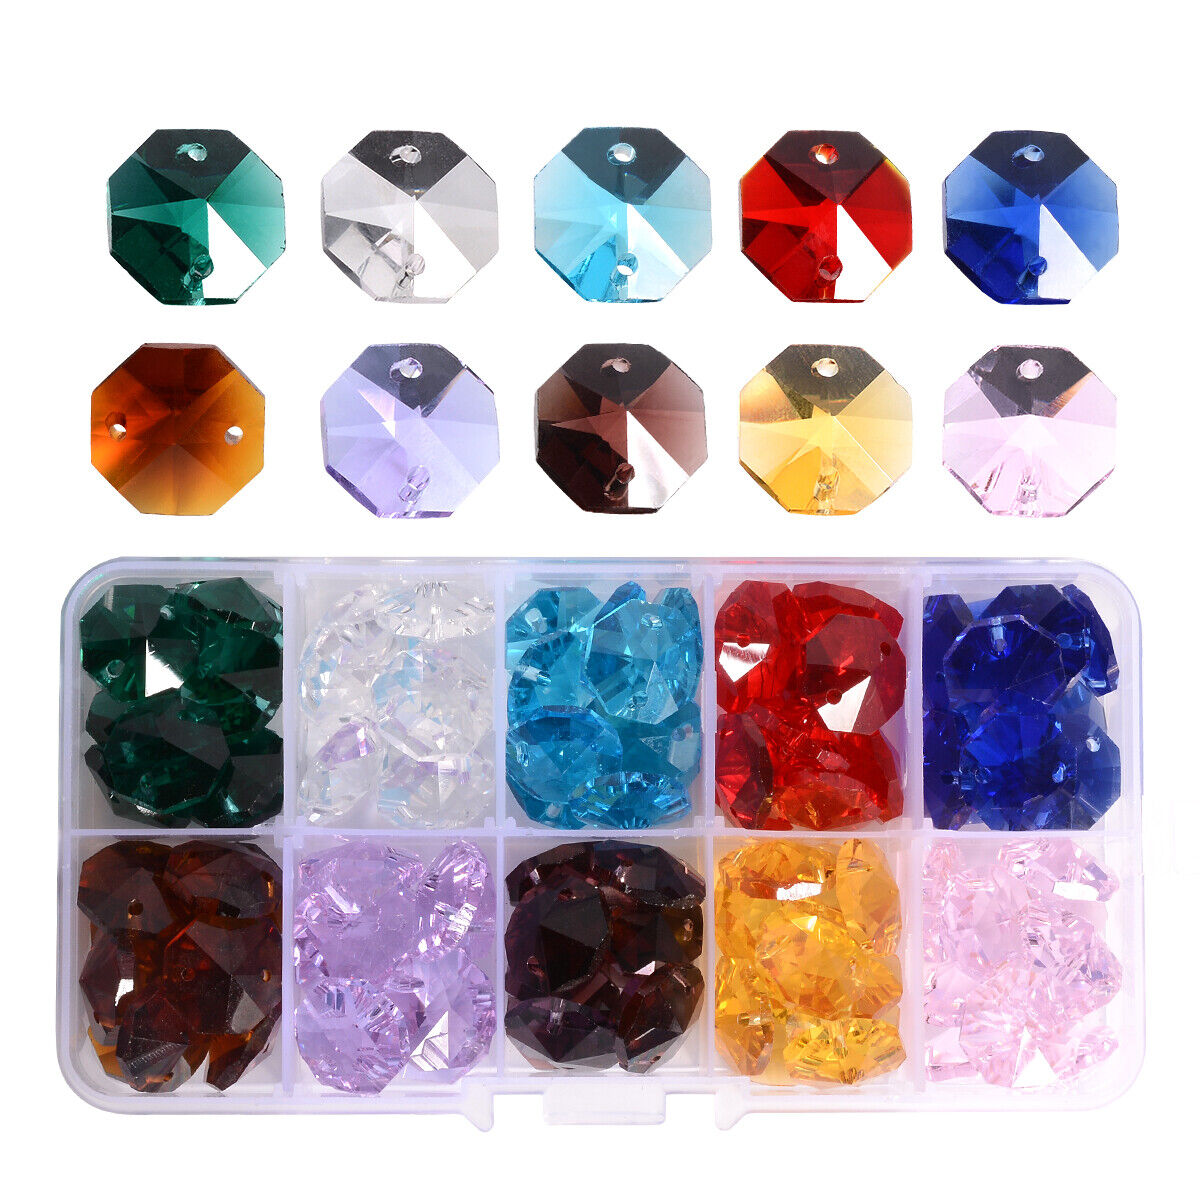 LONGWIN 100pcs 14MM Color Crystal Octagon Beads Chandelier Part Jewelry Making